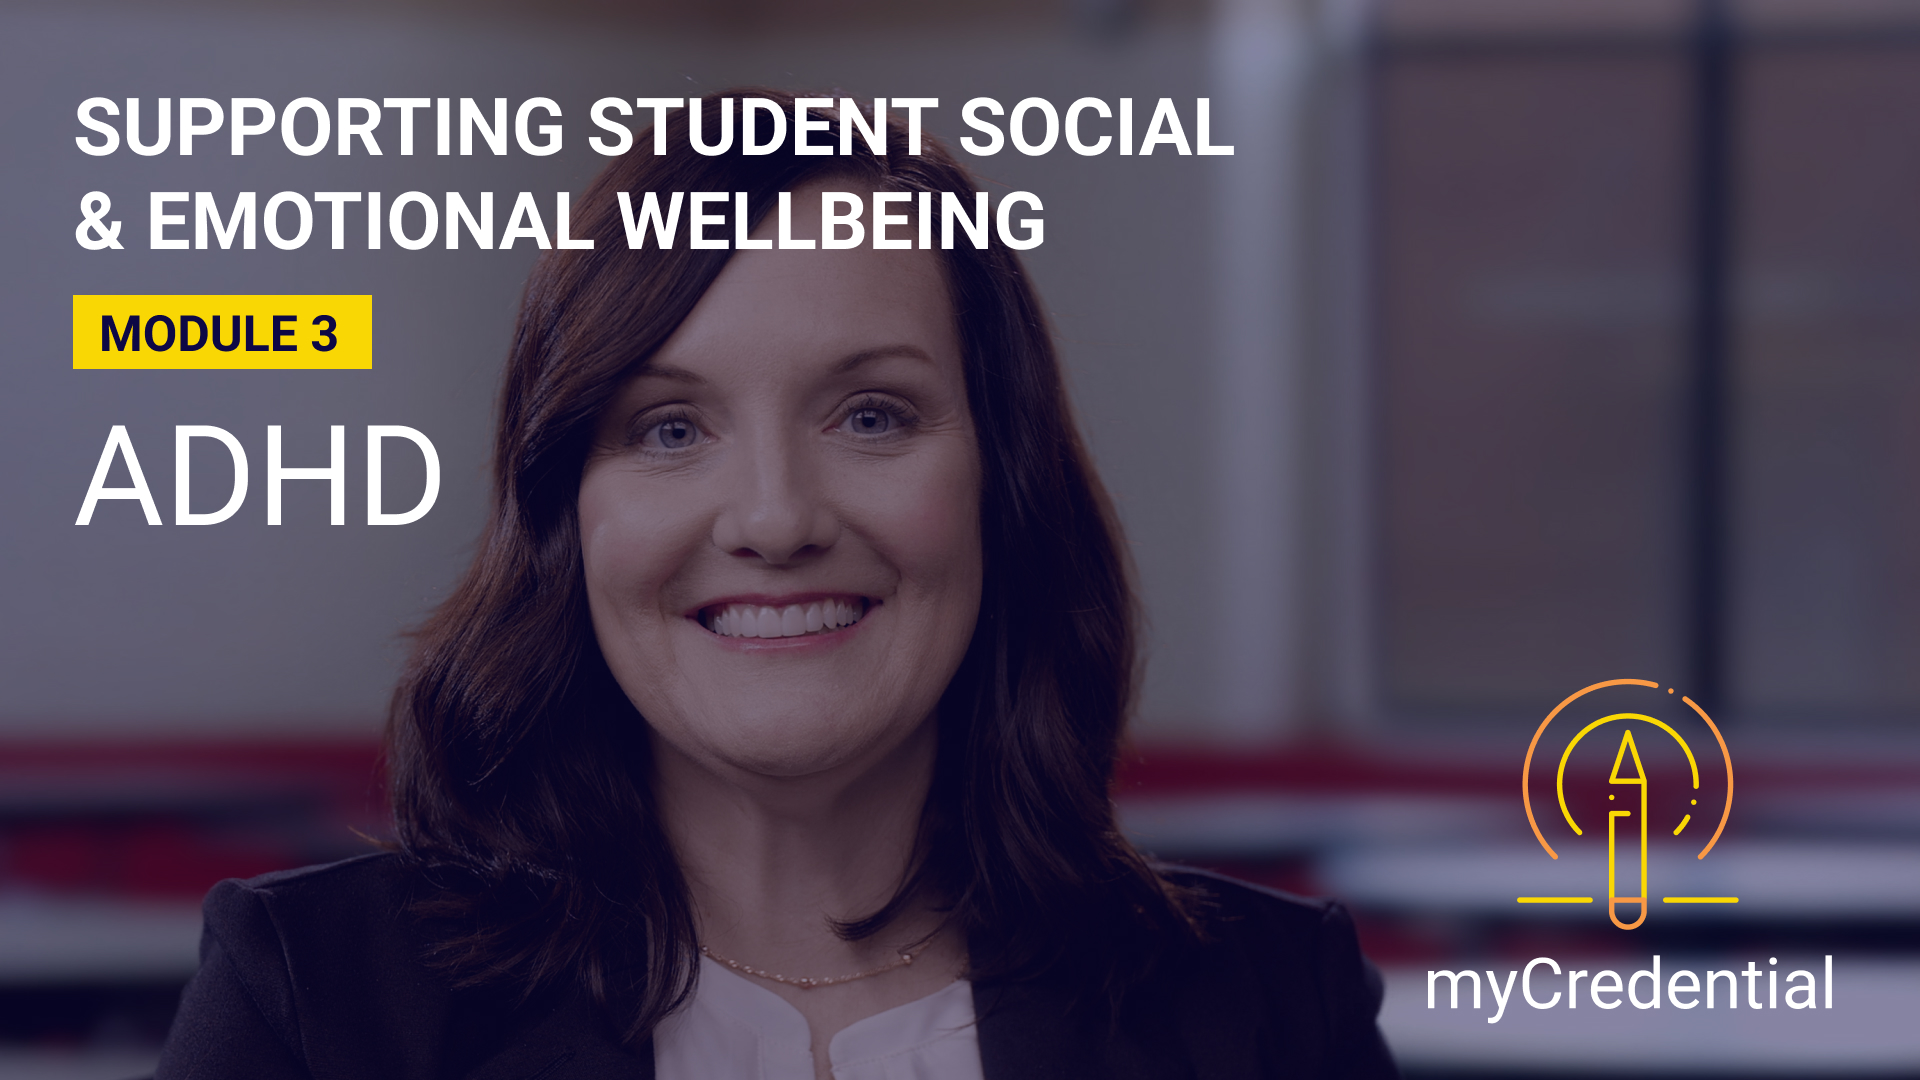 Supporting Student Social & Emotional Wellbeing (Module 3): ADHD